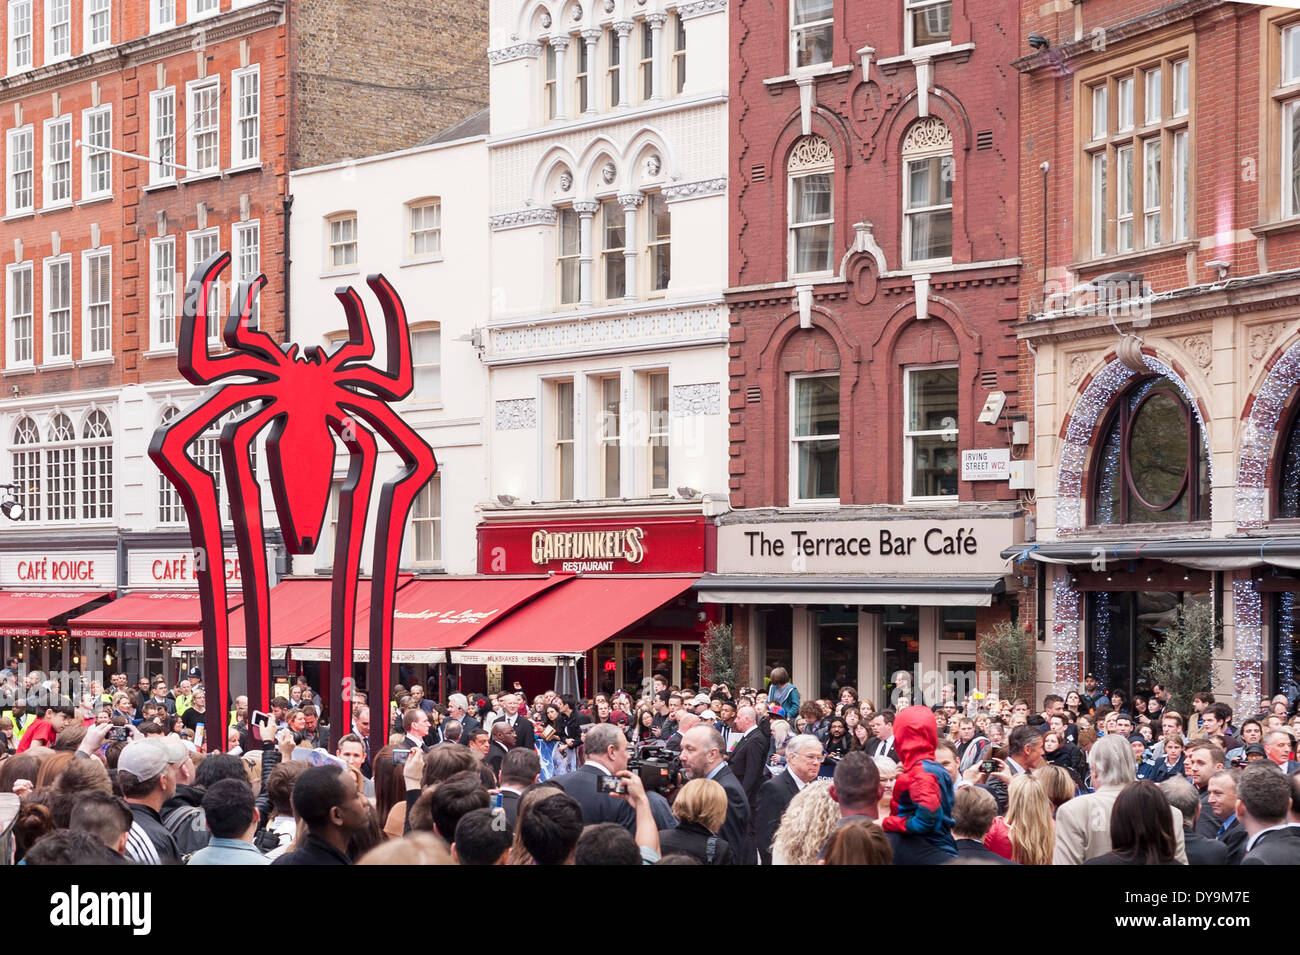 Leicester Square, London, UK, 10 April 2014.  Crowds gather to see the stars of  'The Amazing Spider-Man 2' movie which was having its world premiere. Credit:  Stephen Chung/Alamy Live News Stock Photo